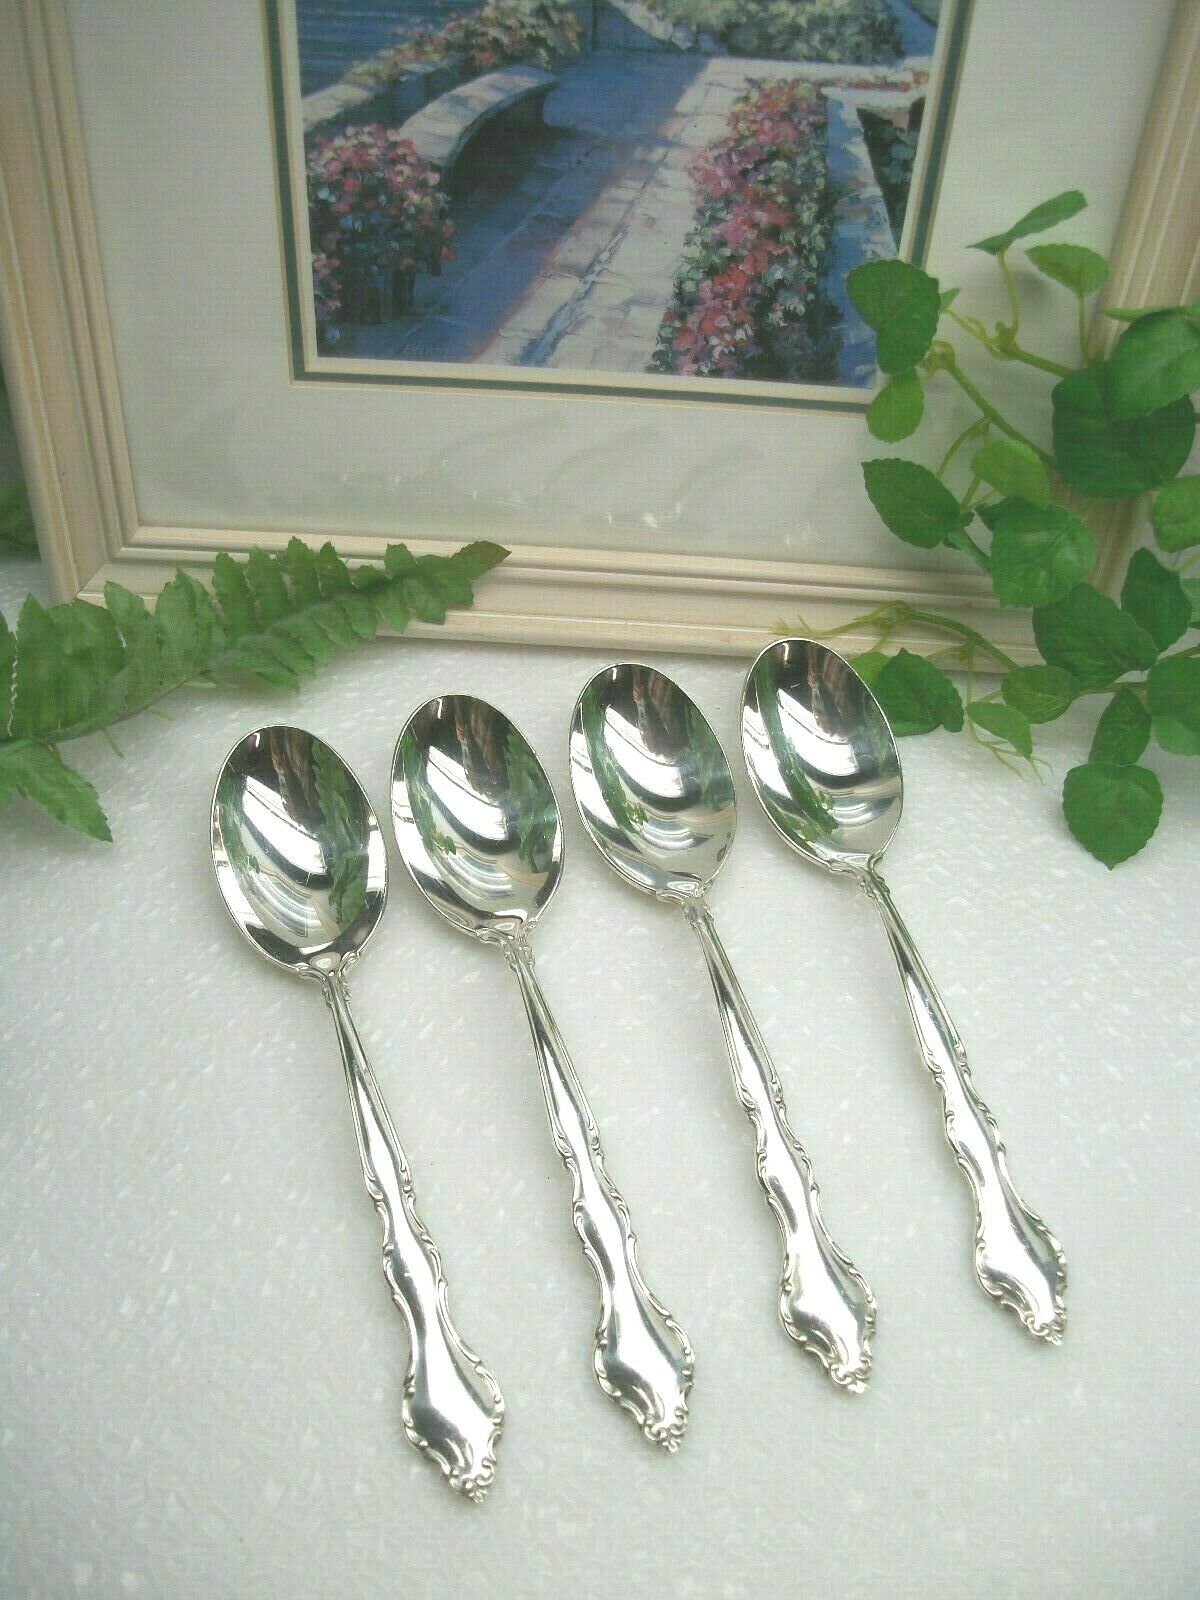 4  International Deep Silver  Wakefield  Silverplate Oval Place Soup Spoons 1965